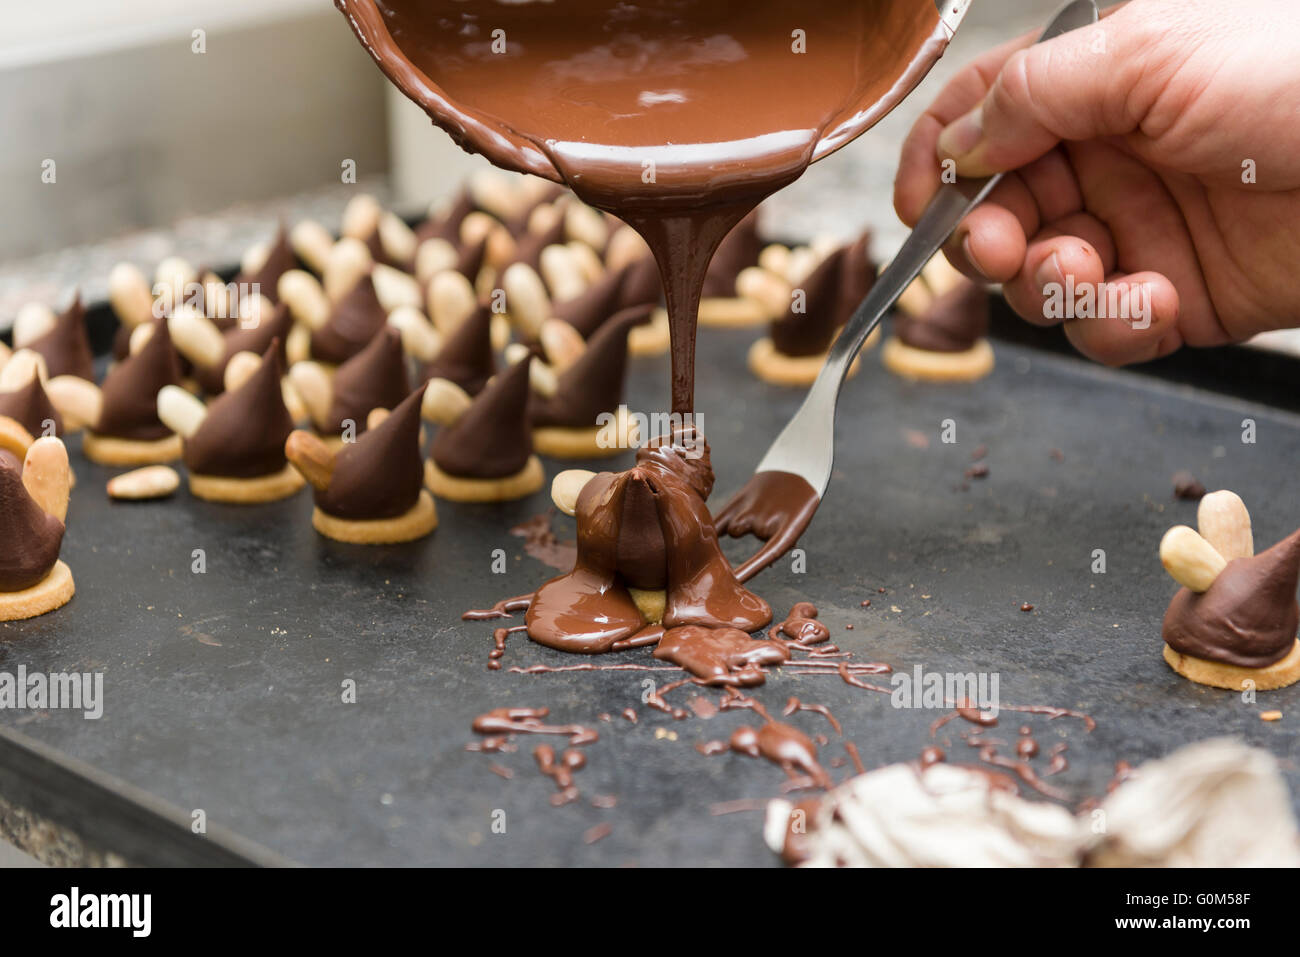 pastry chef covering the biscuits with melted chocolate Stock Photo